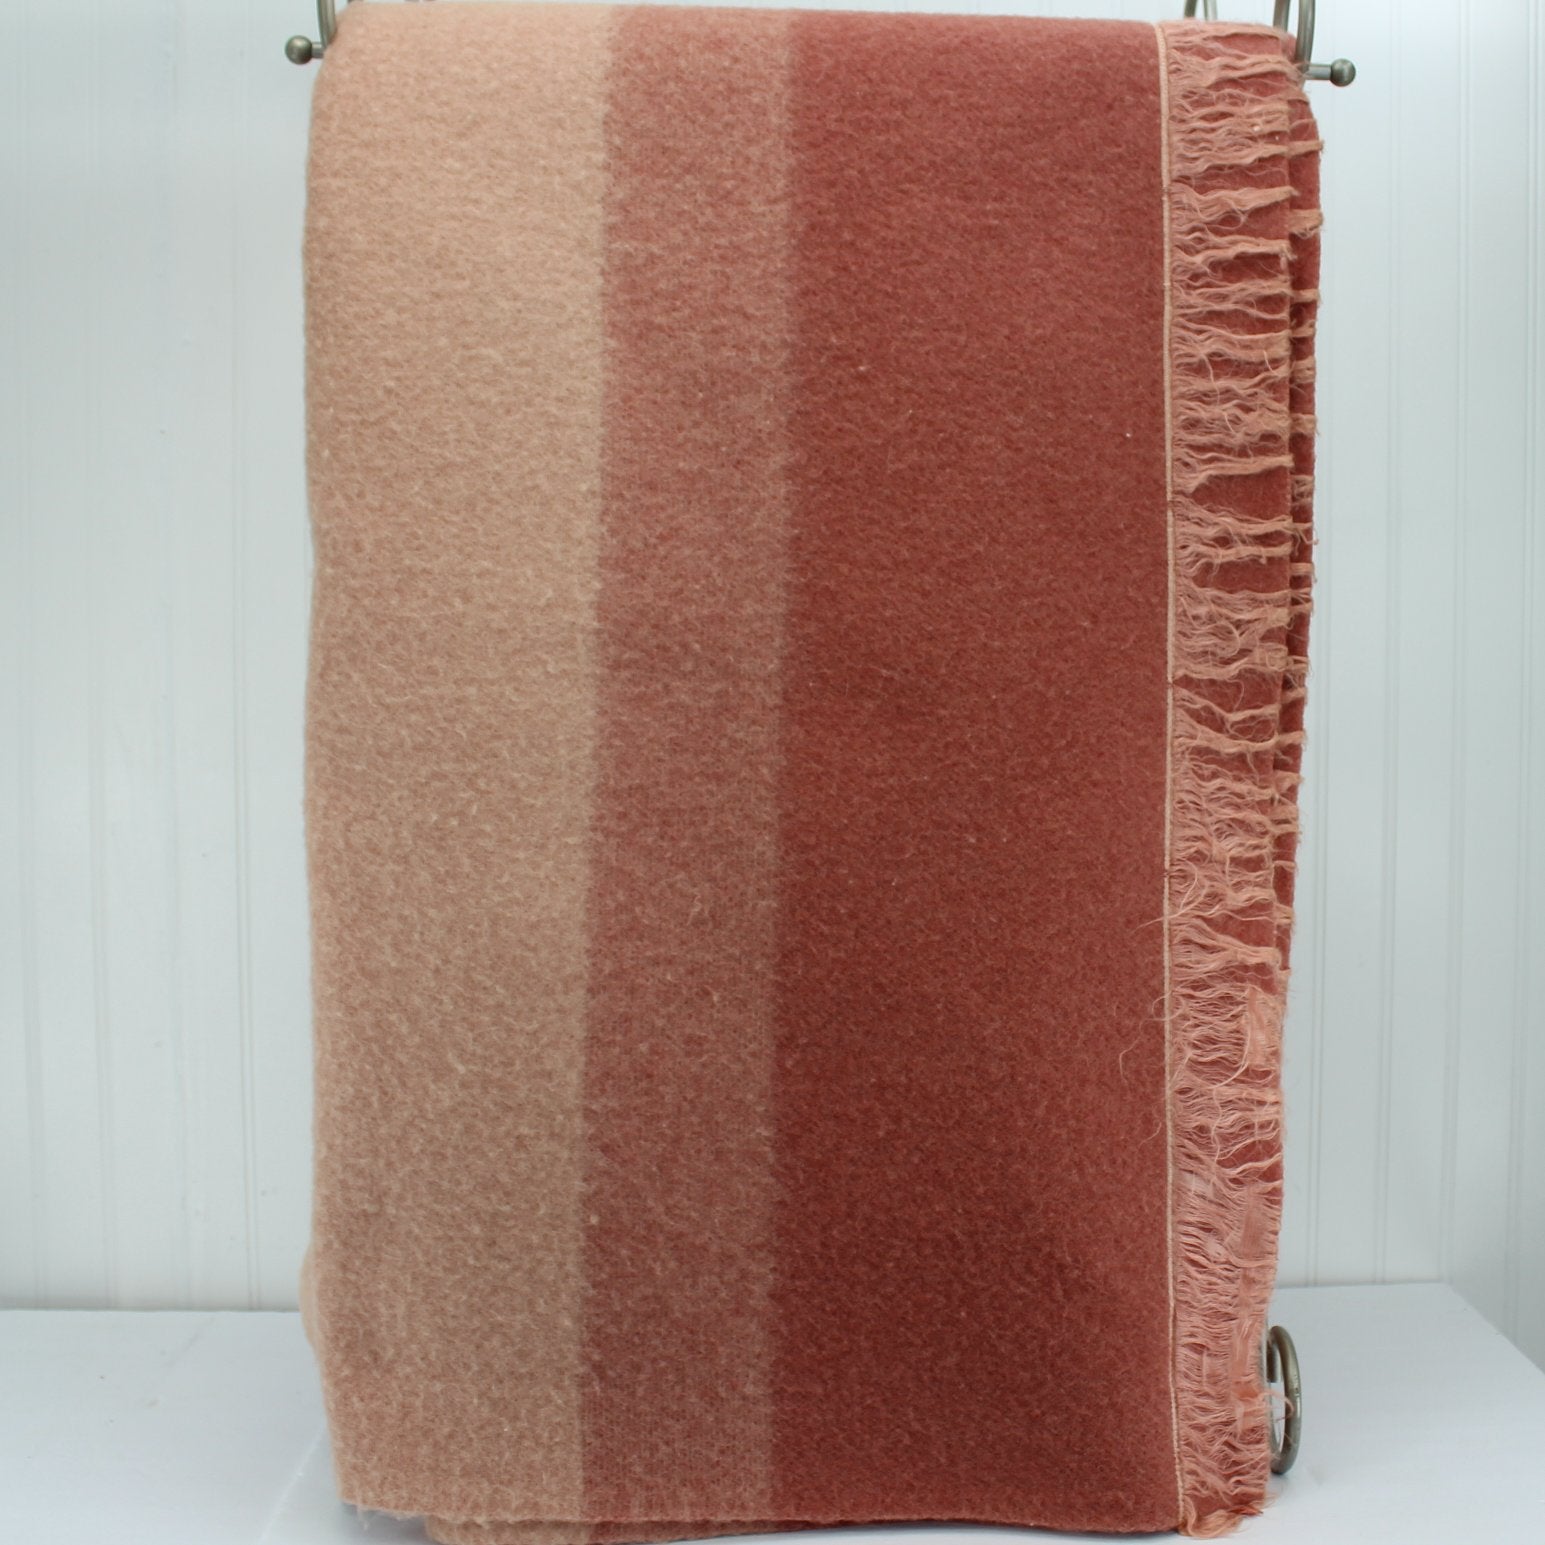 St Marys Ohio Wool Blanket Ombre Pink Rose Fray Binding Special 73" X 82" bands of color view